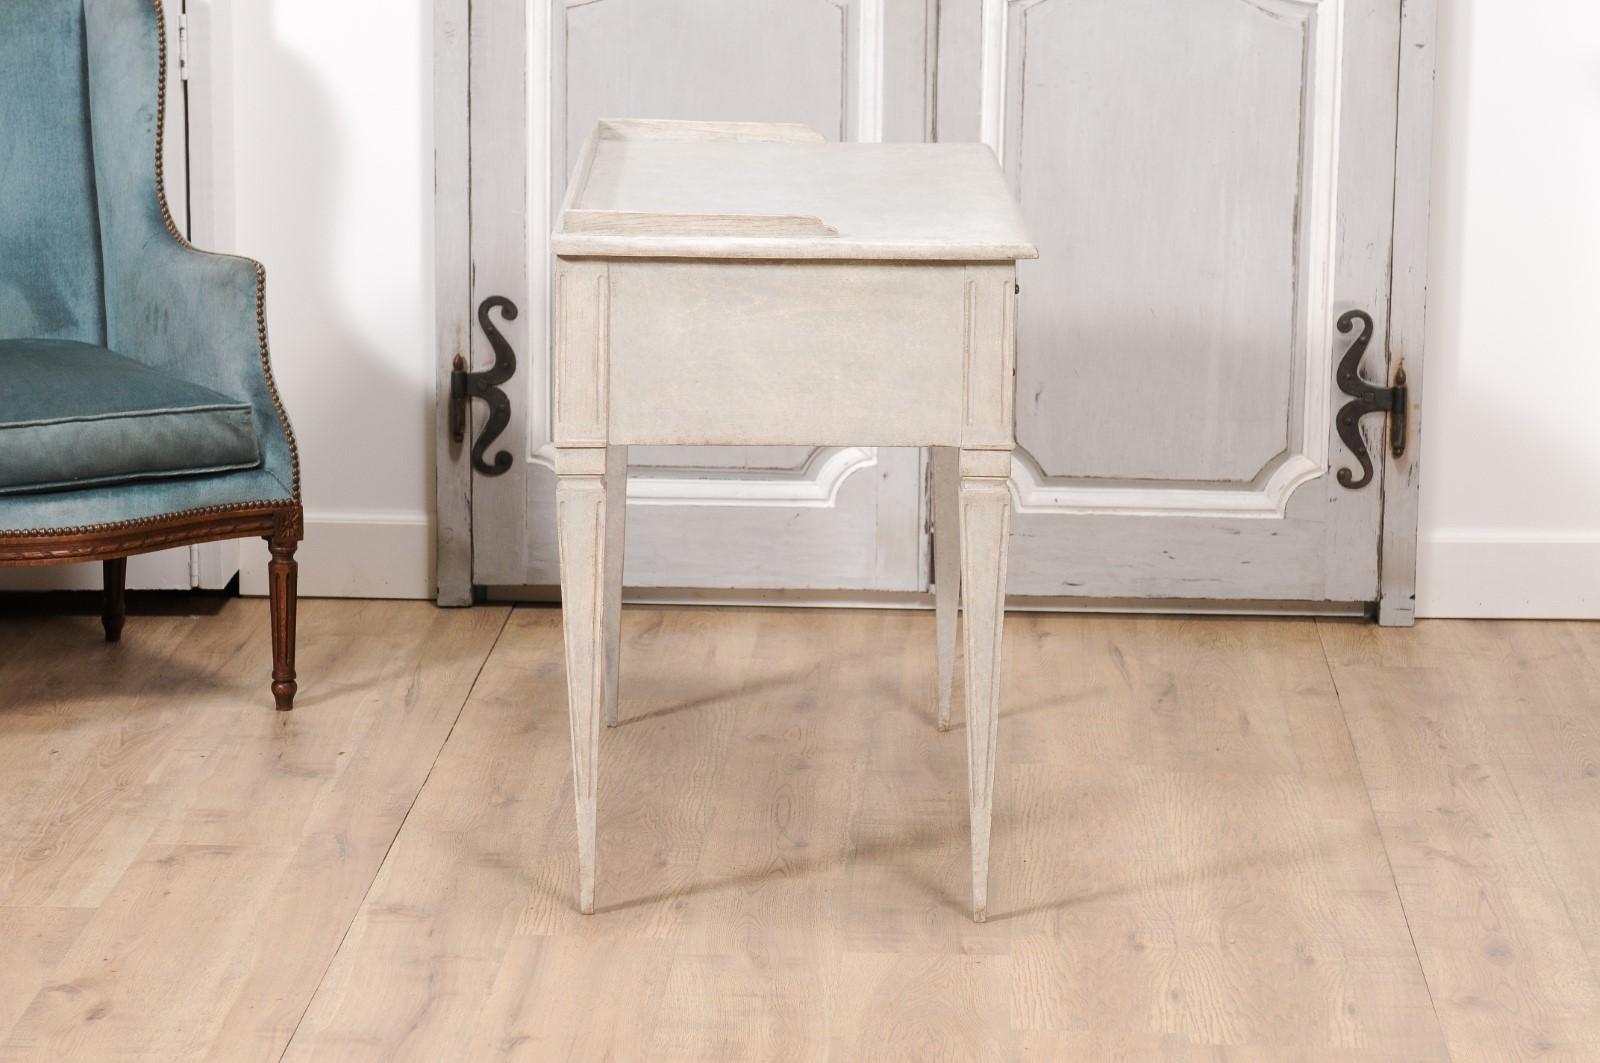 Wood 1880s Swedish Gustavian Style Painted Desk with Five Drawers and Tapered Legs For Sale